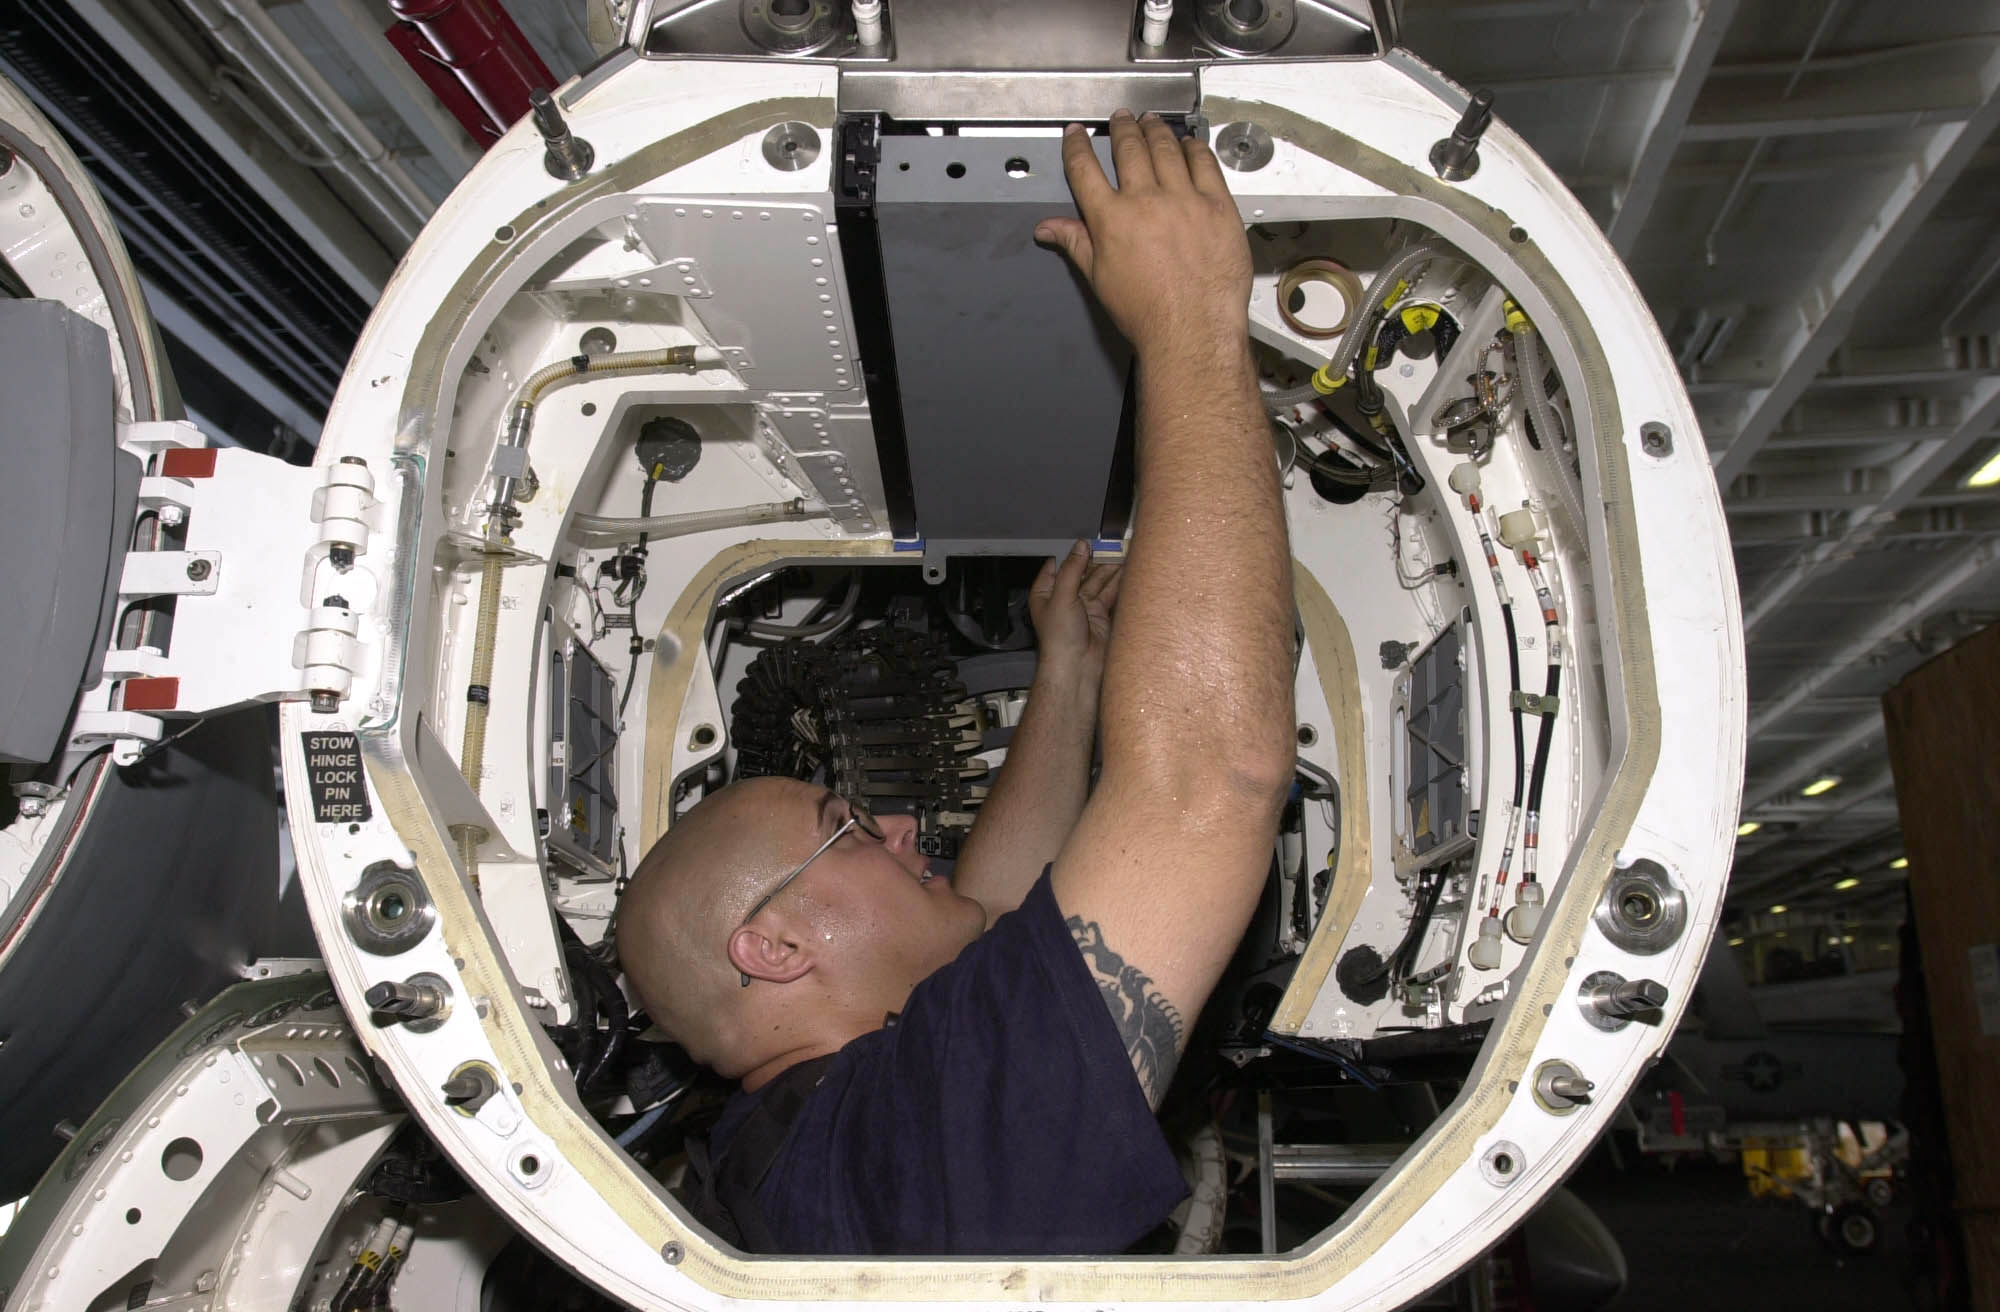 US Navy 030616-N-2143T-004 Aviation Electronics Technician 2nd Class James Gray from Bakersfield, Calif., works on an installation rack